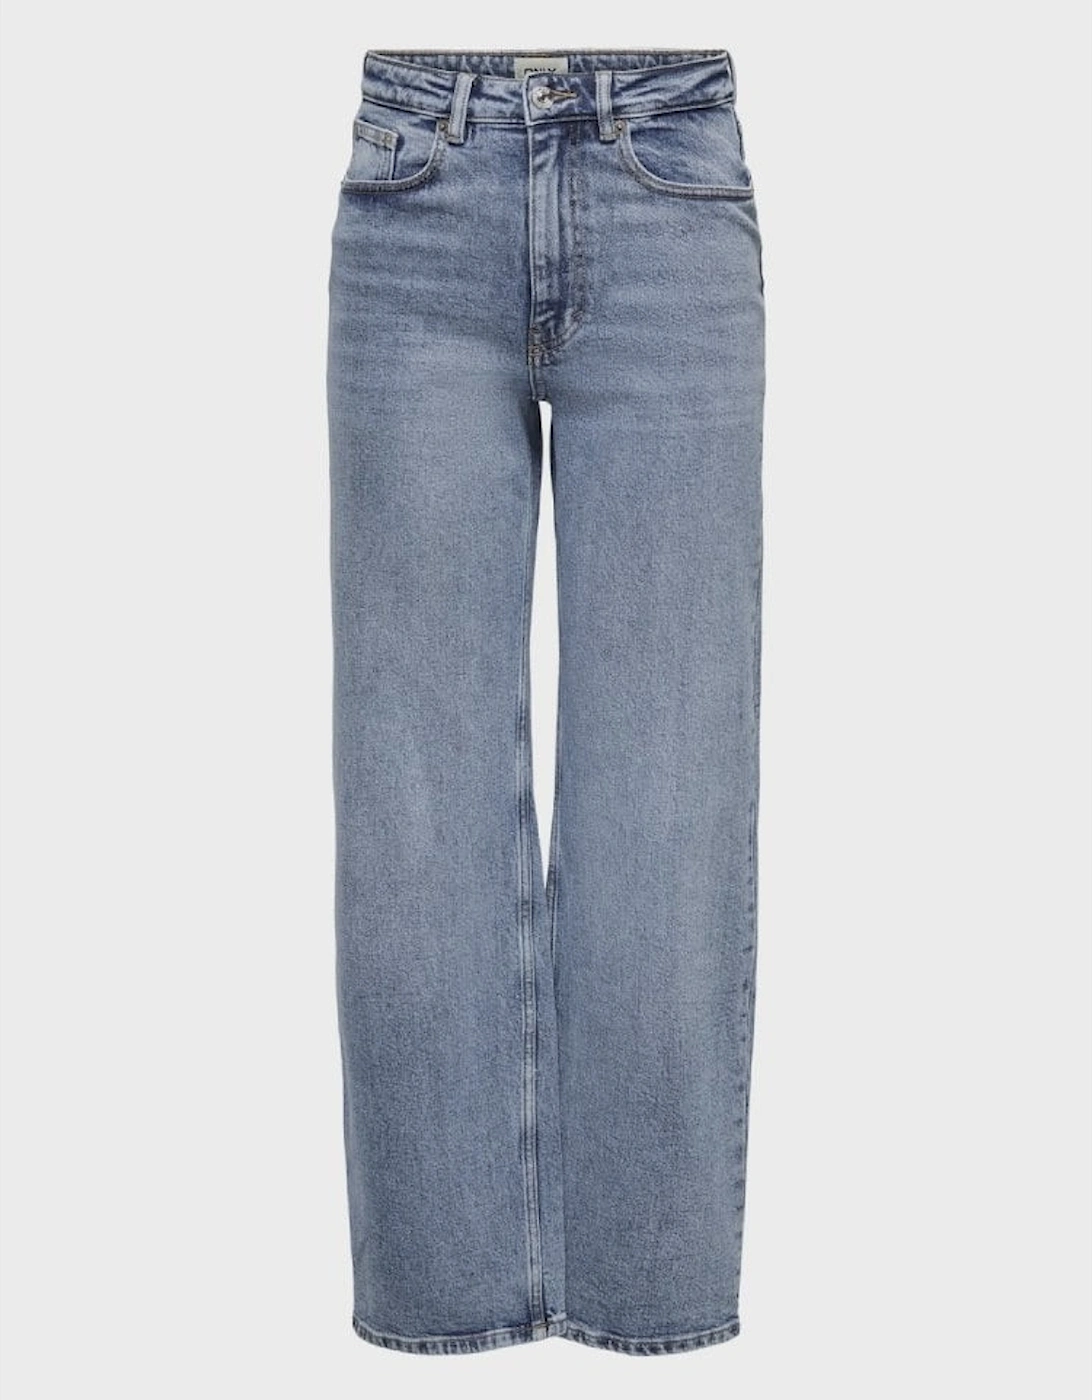 Juicy Life Wide High Waisted Jeans - Blue Denim